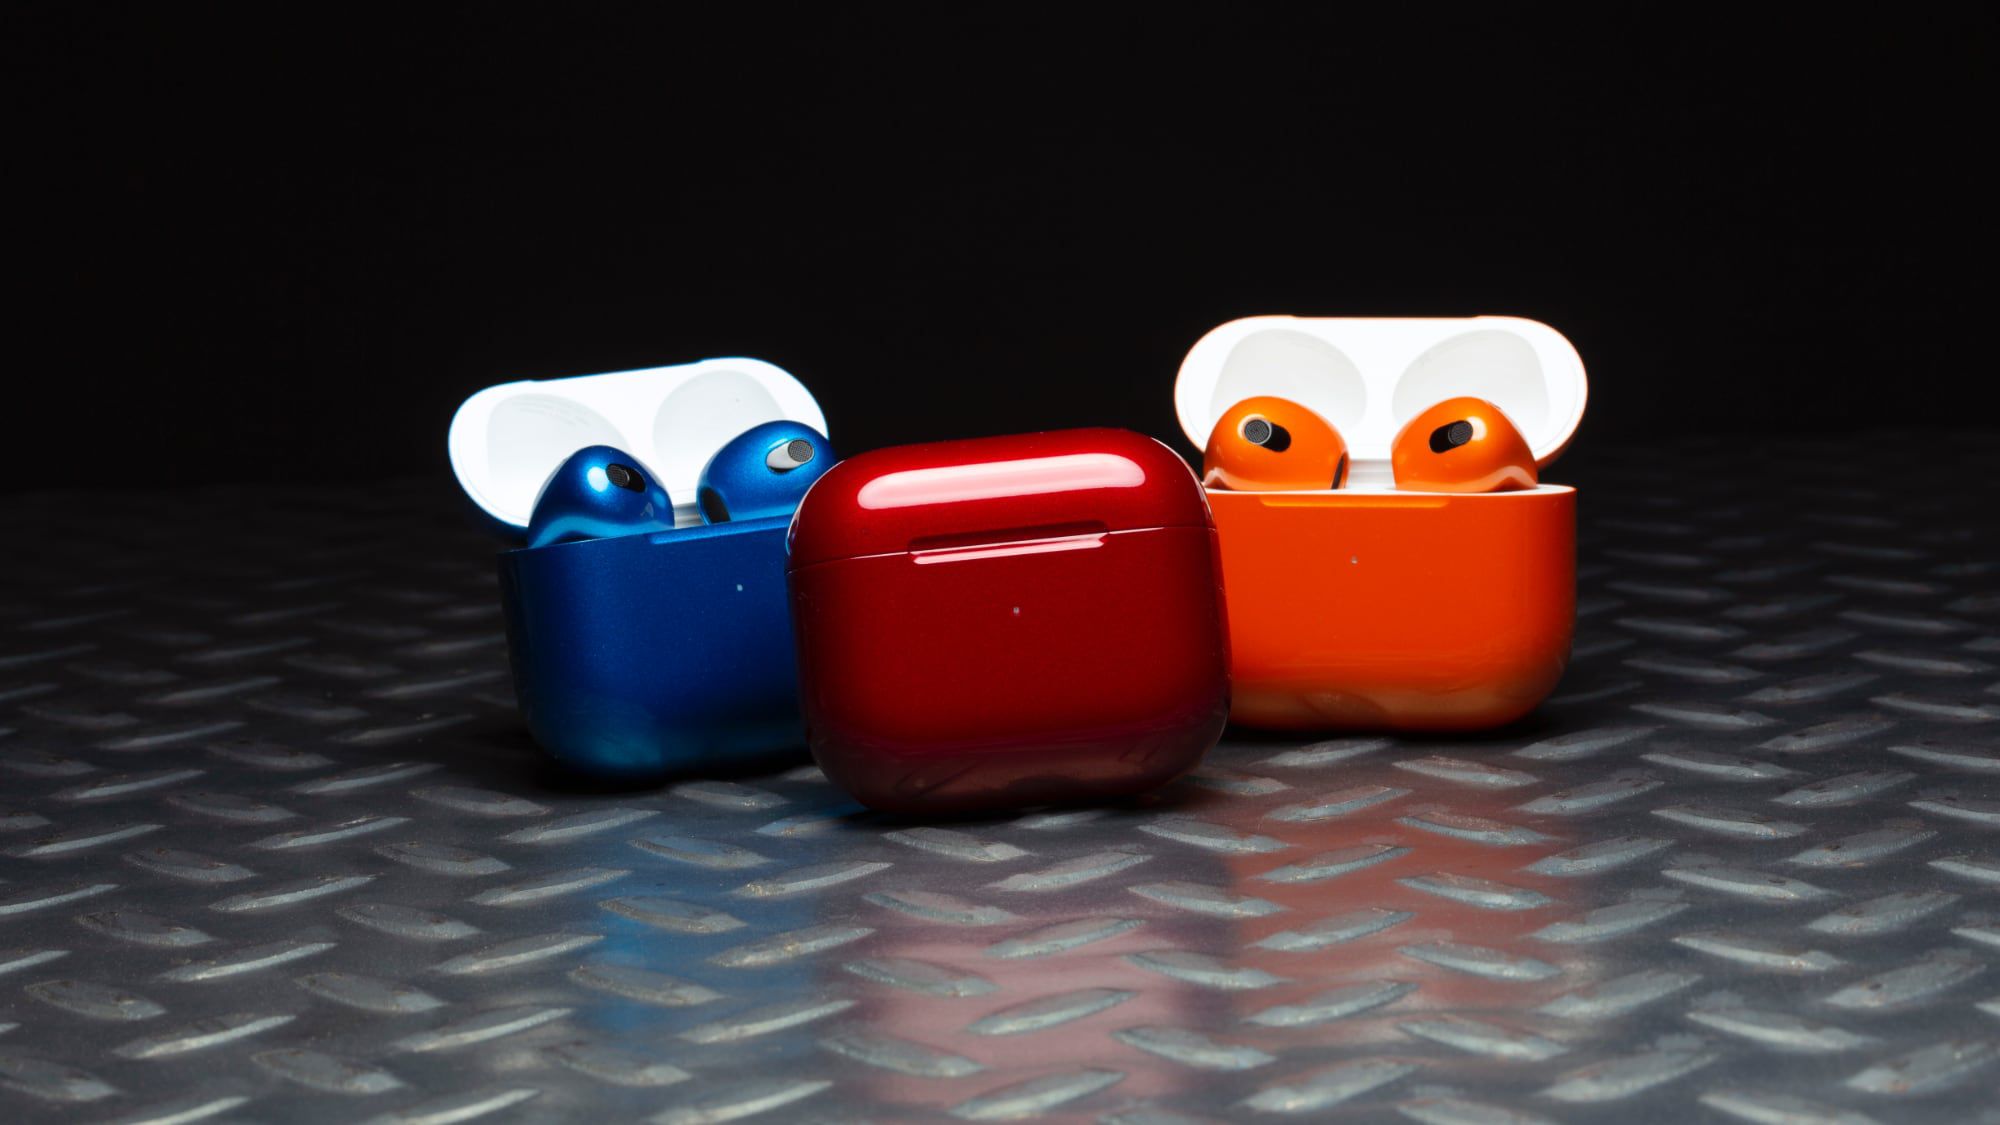 MacRumors Giveaway: Win Personalized AirPods in Any Coloration From ColorWare